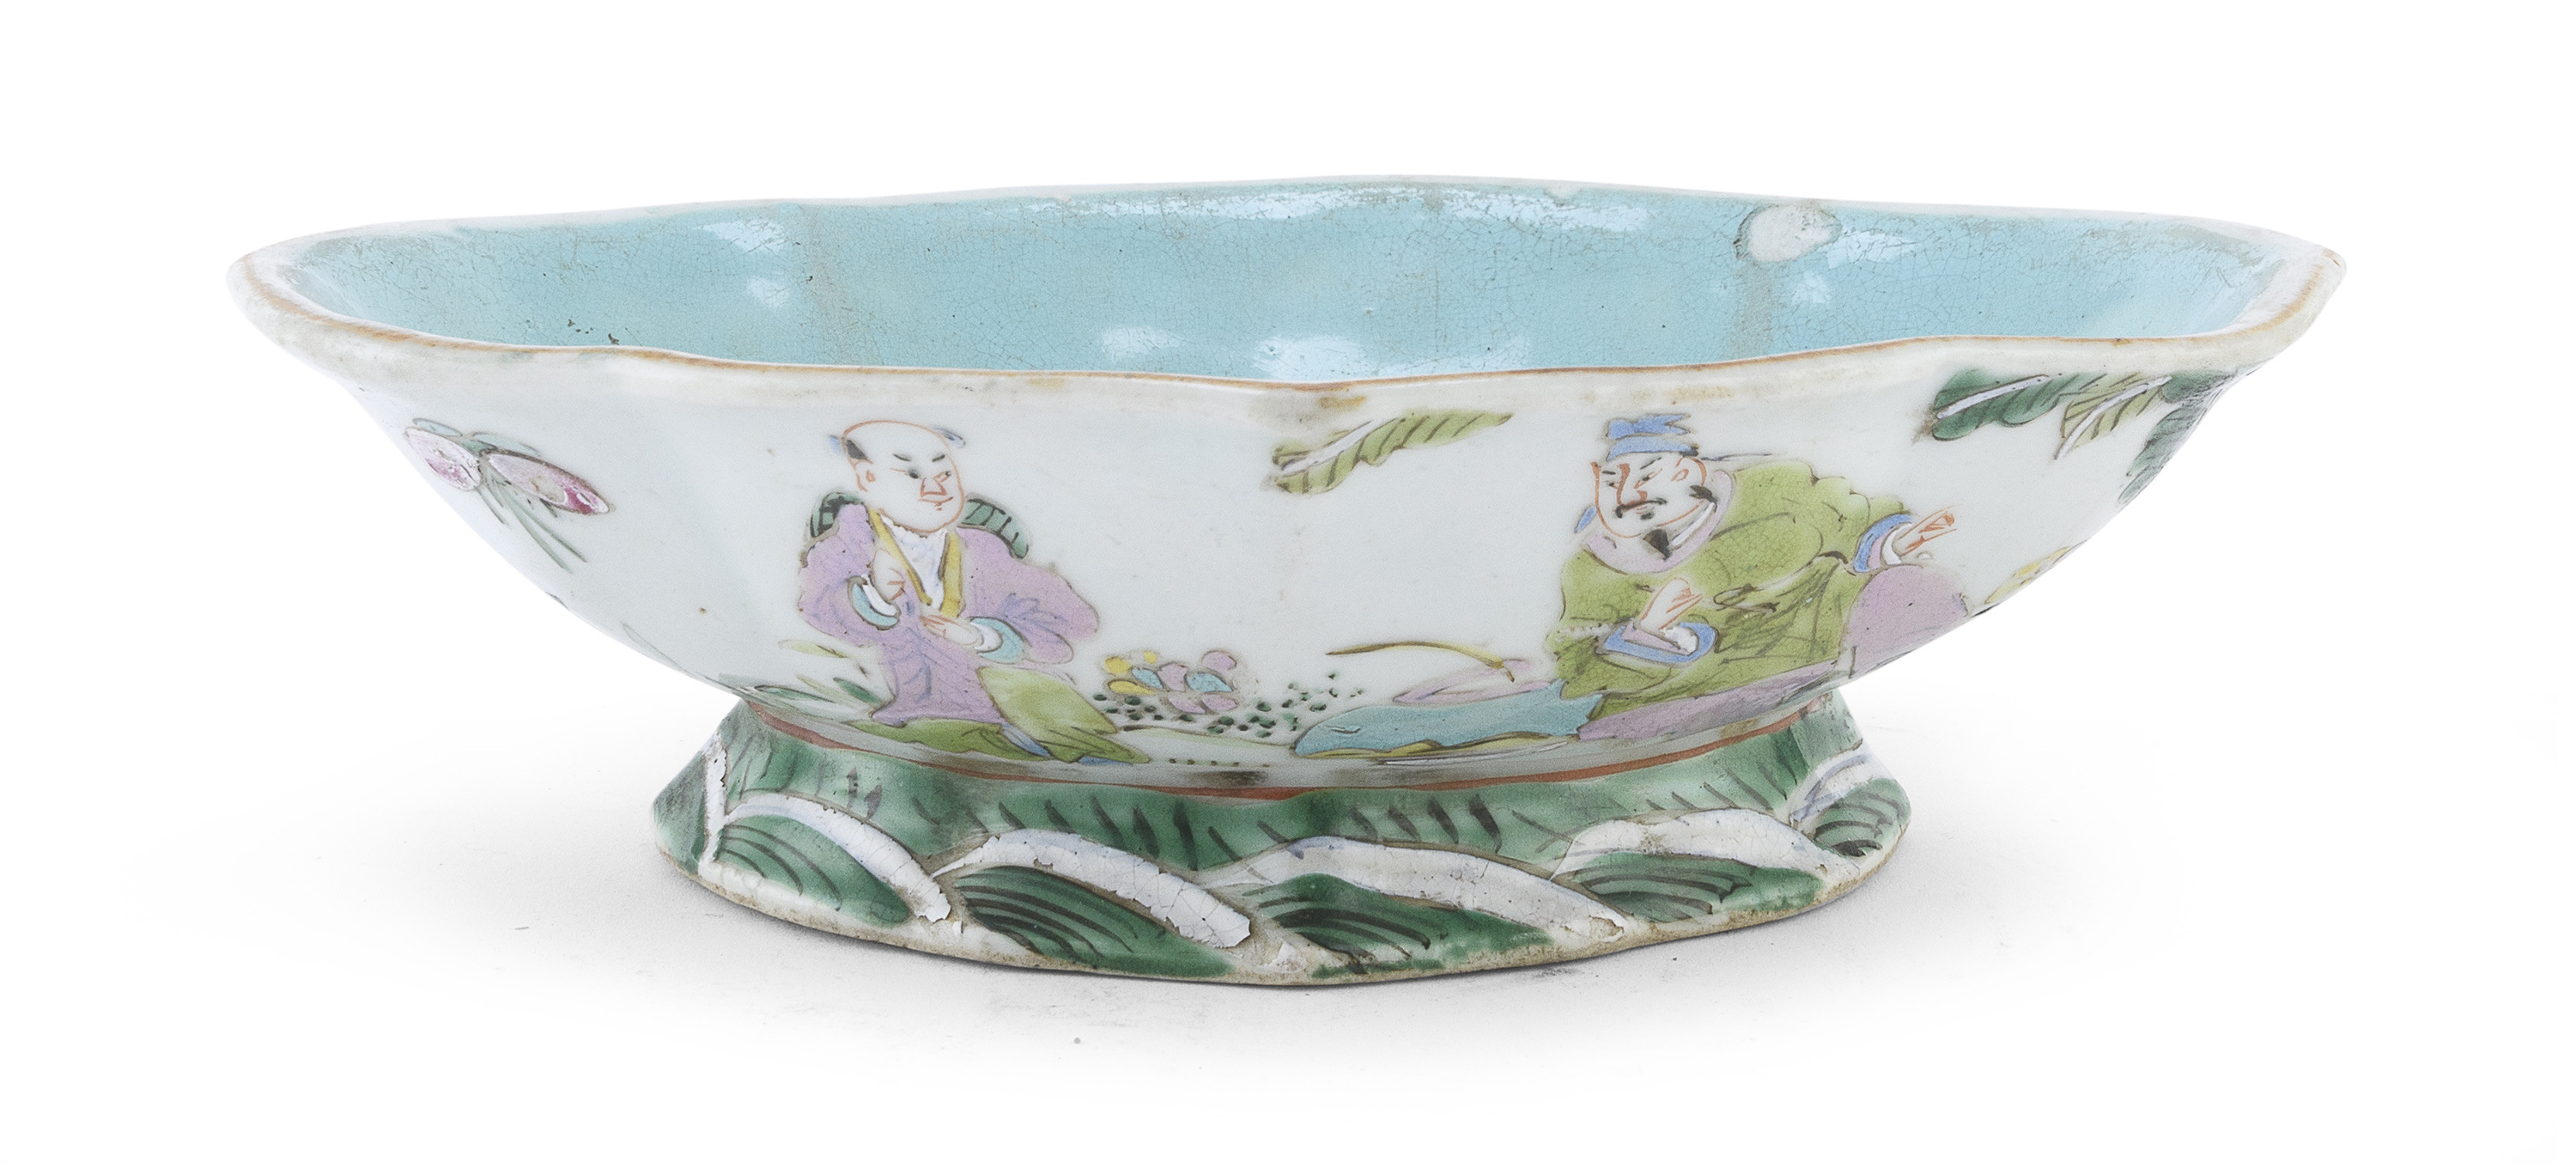 A CHINESE POLYCHROME ENAMELED PORCELAIN STAND EARLY 20TH CENTURY.